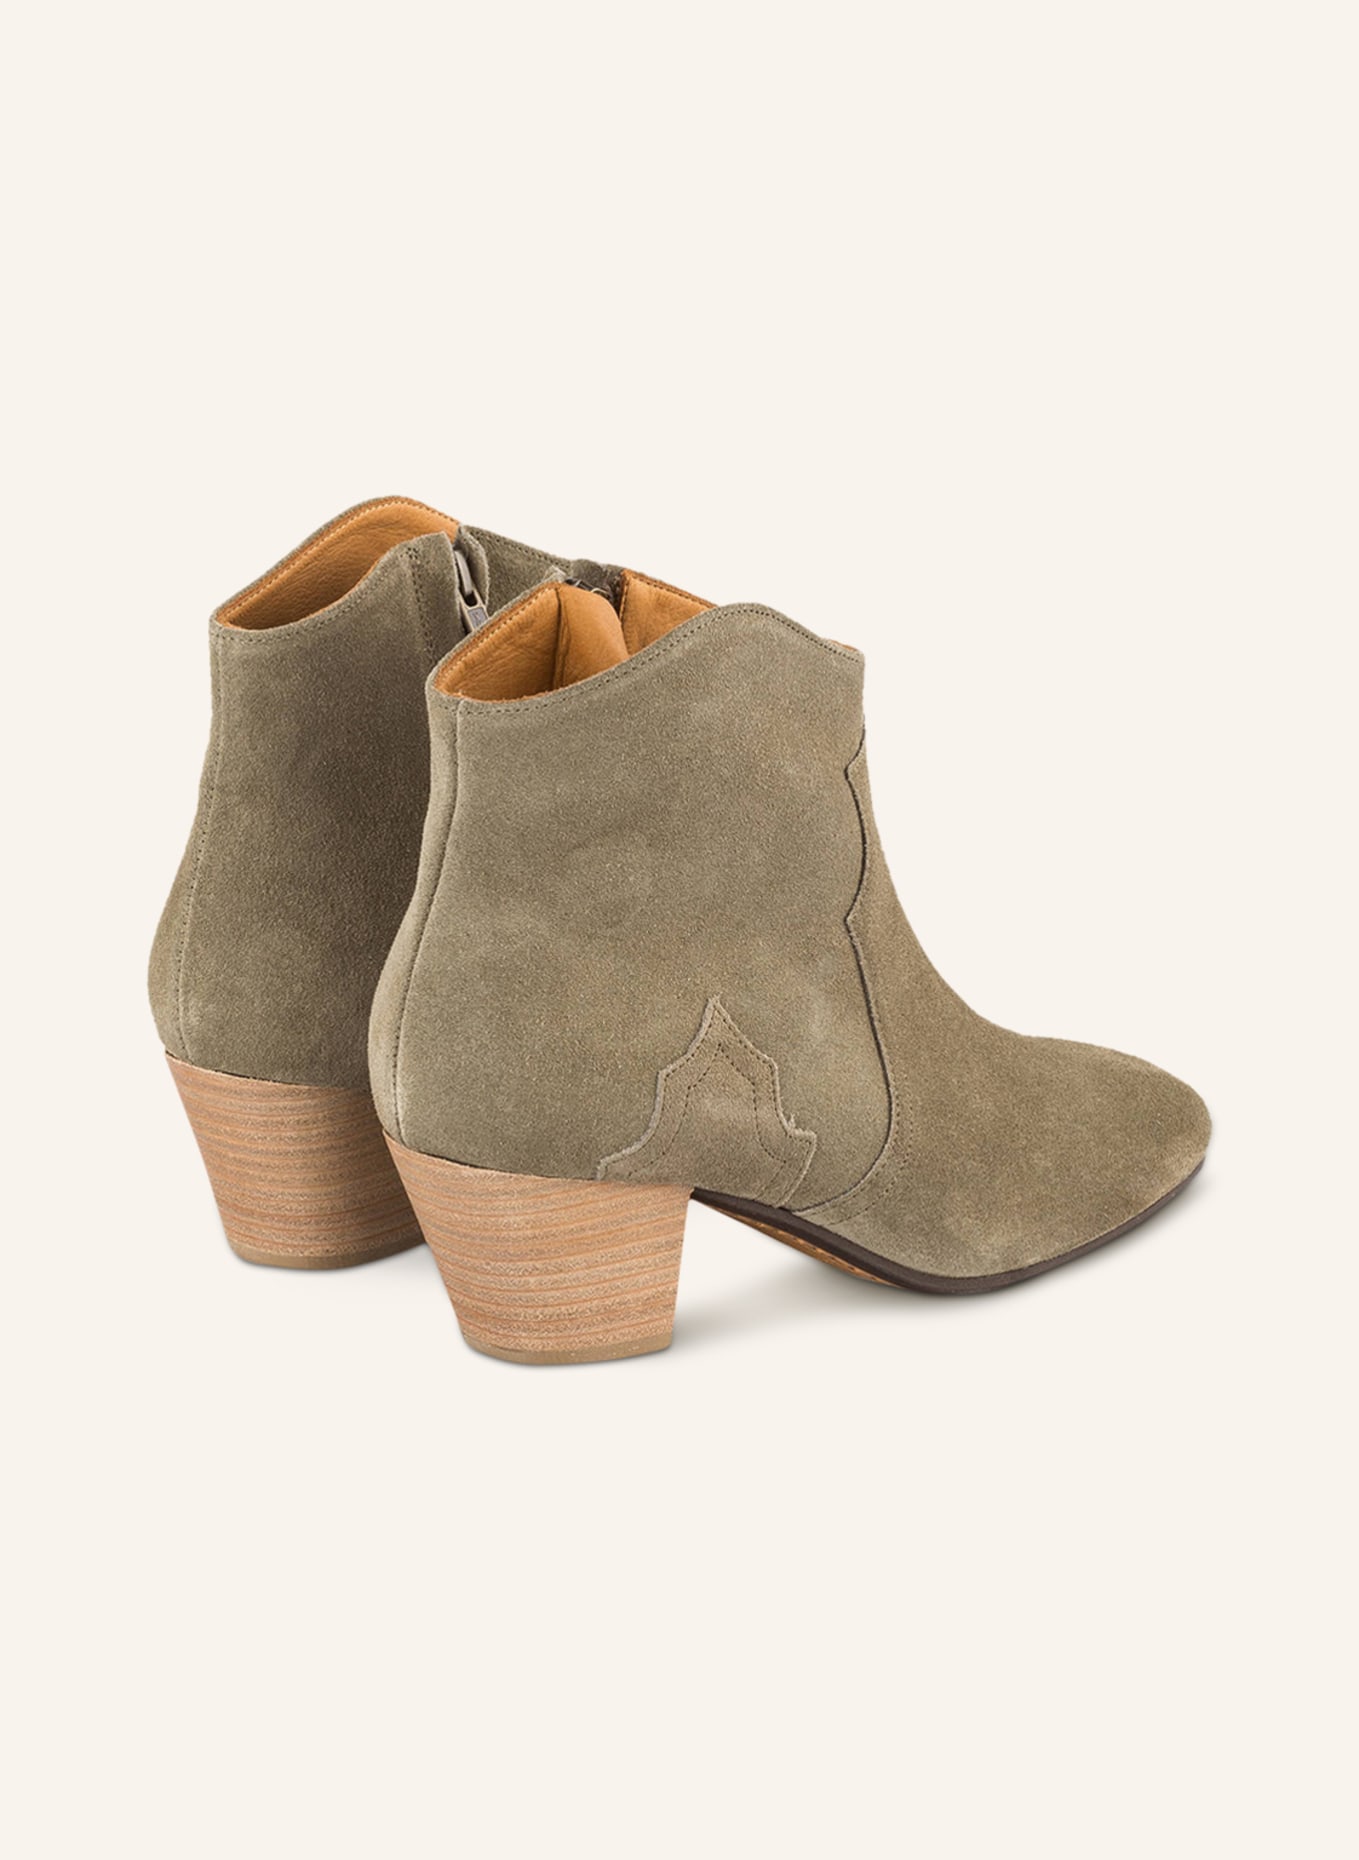 ISABEL MARANT Cowboy Boots DICKER, Farbe: TAUPE (Bild 2)